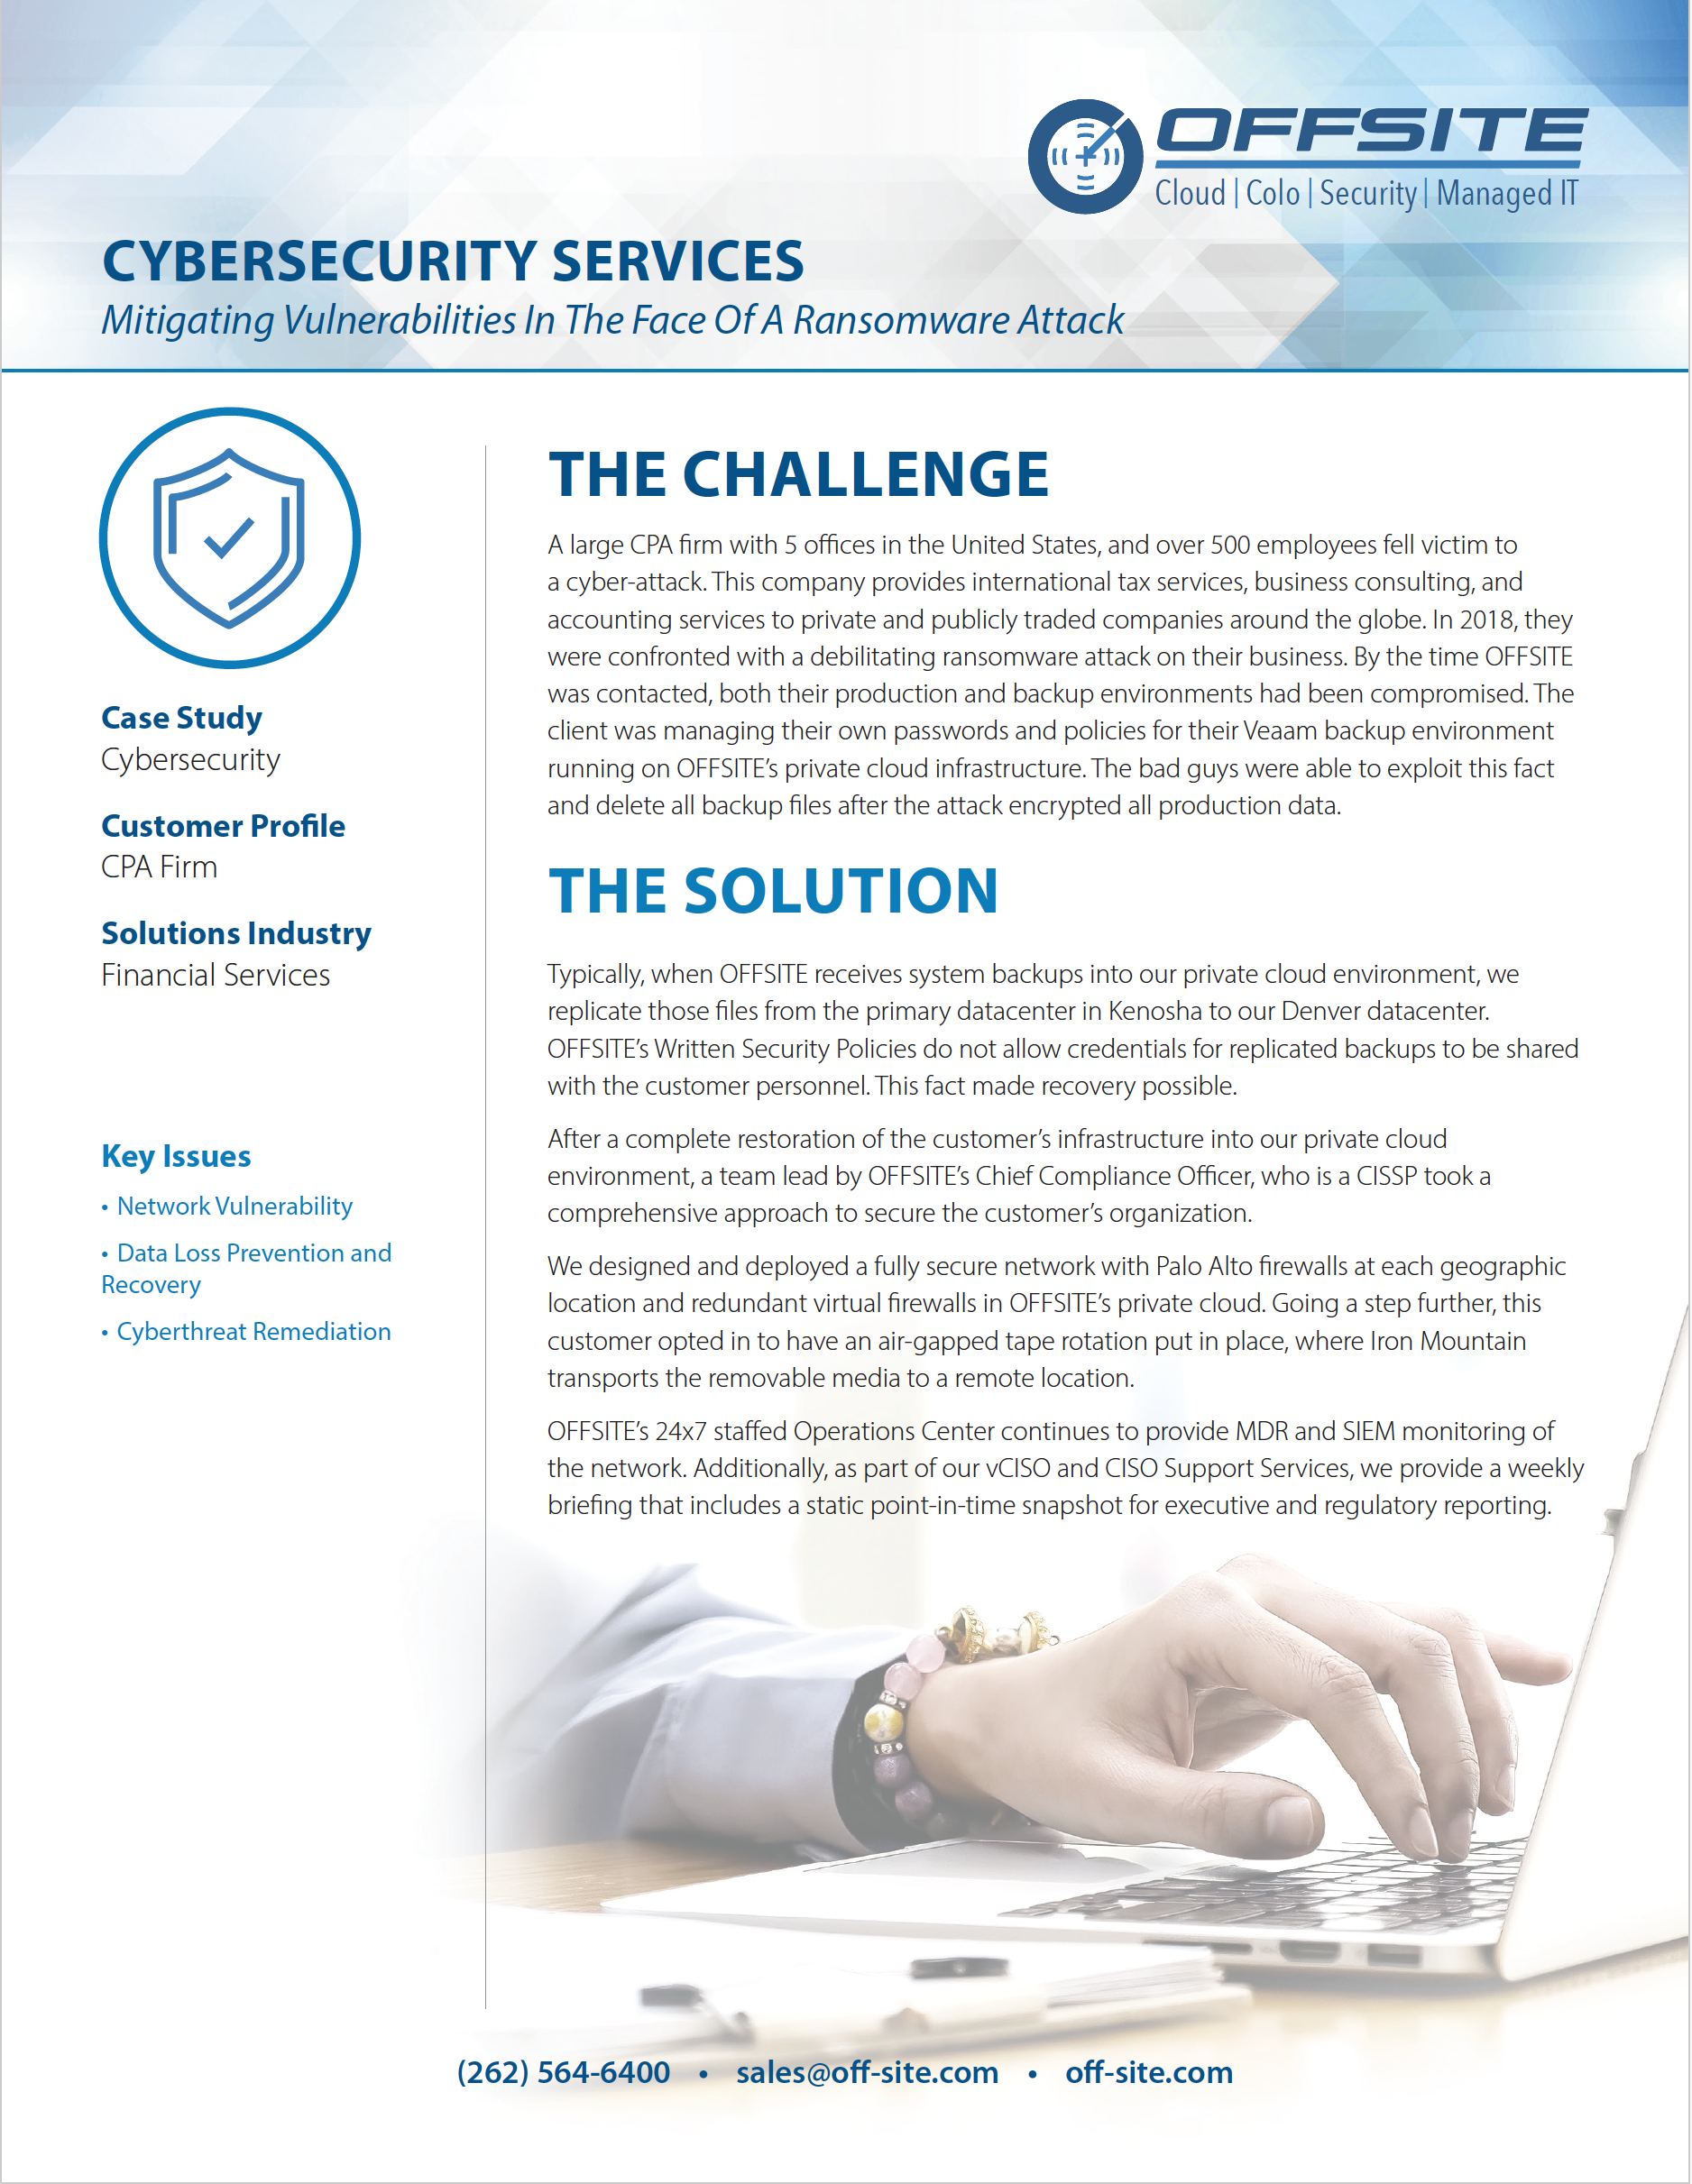 OFFSITE offers cybersecurity services from our data center in Kenosha, WI. Download our financial services ransomware case study.